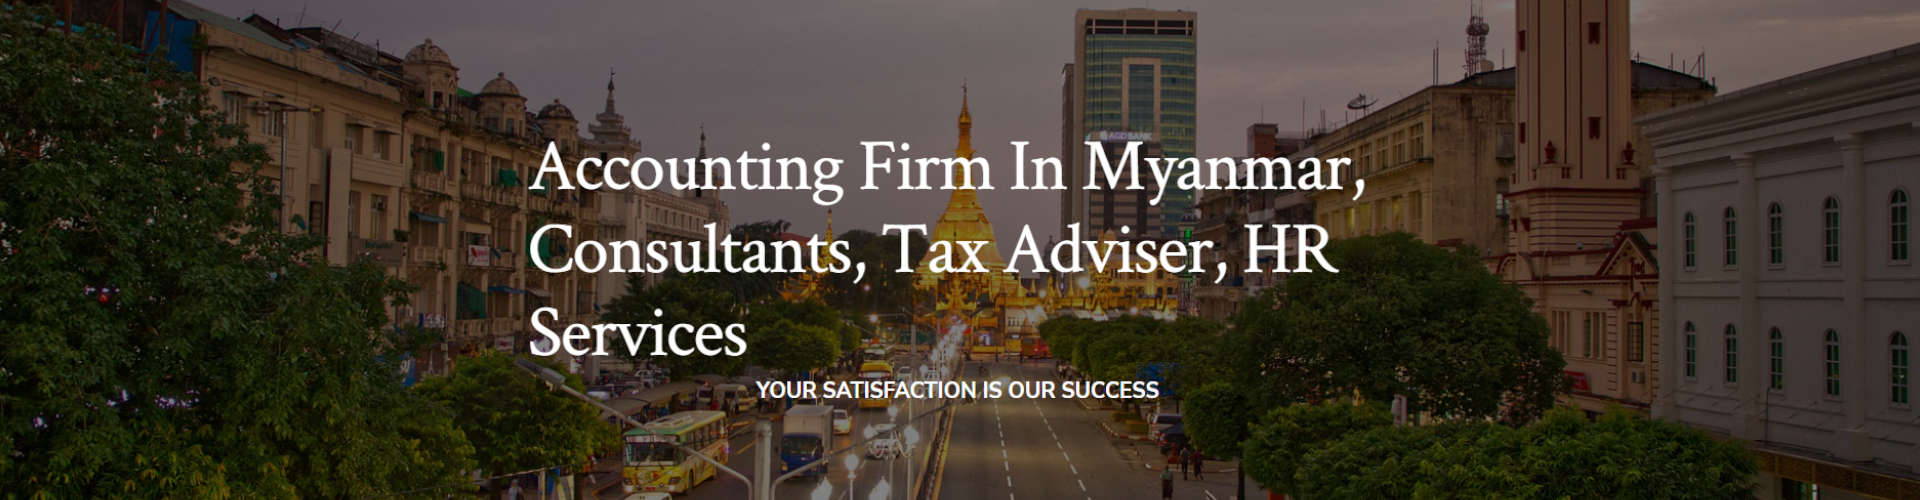 Myanmar accounting firm With Corporate services